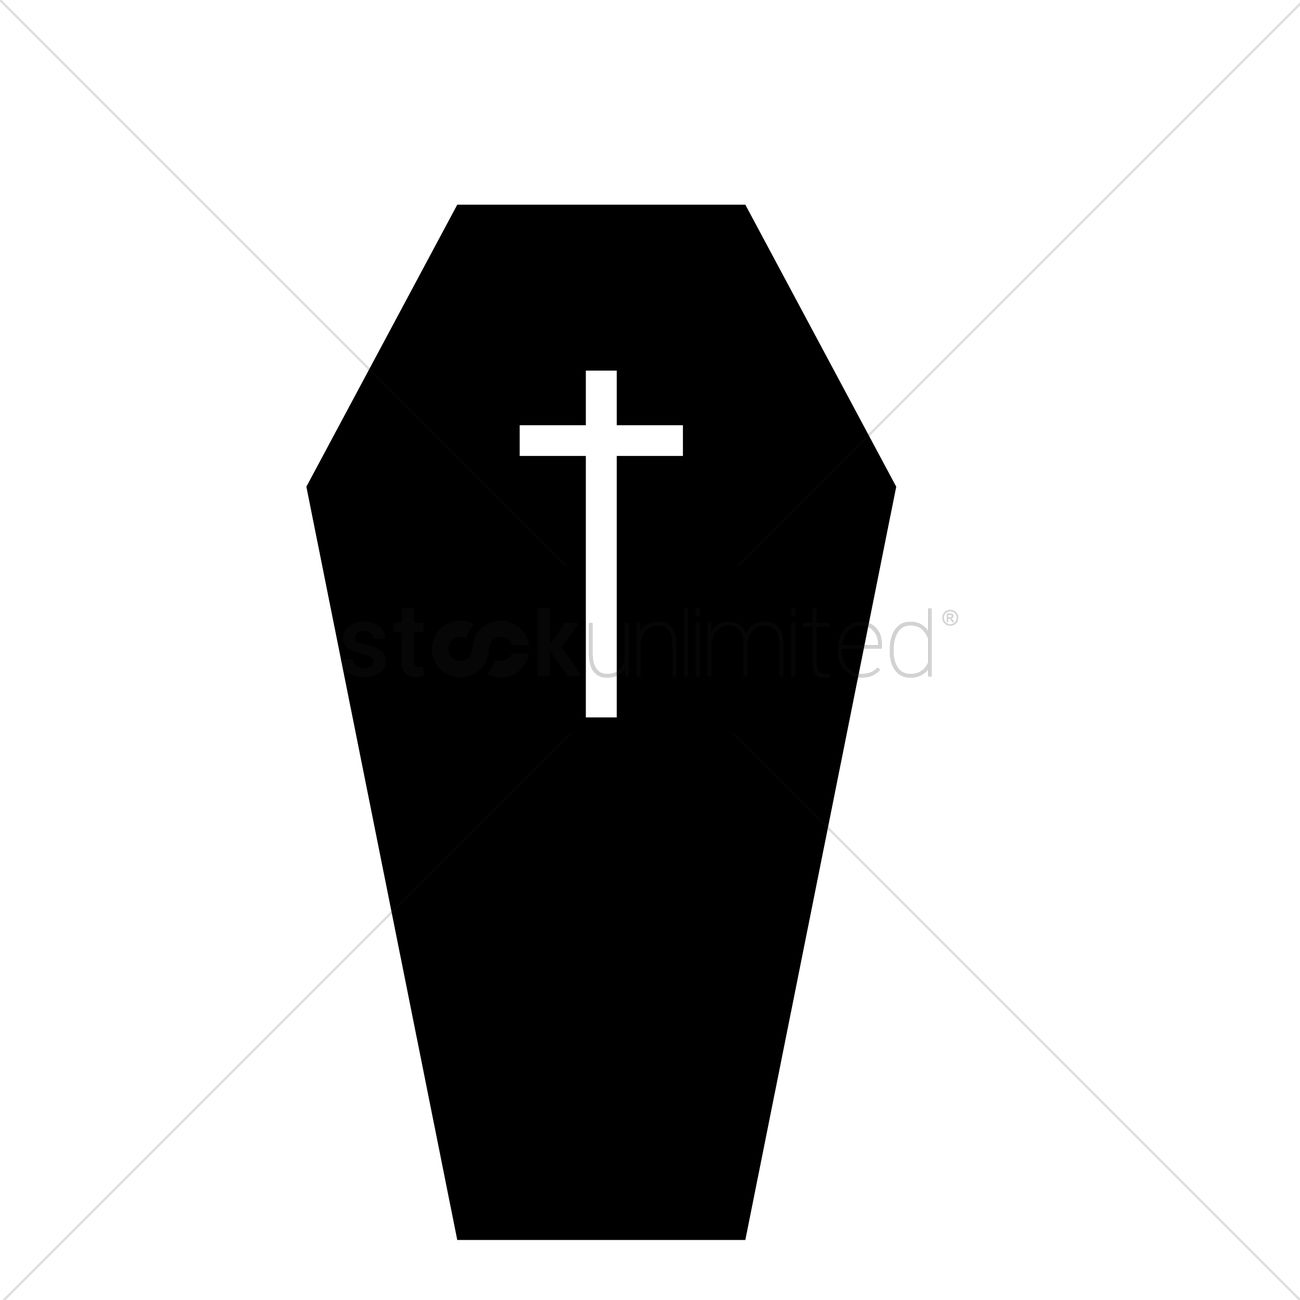 Grim reaper clipart coffin. Free download best on